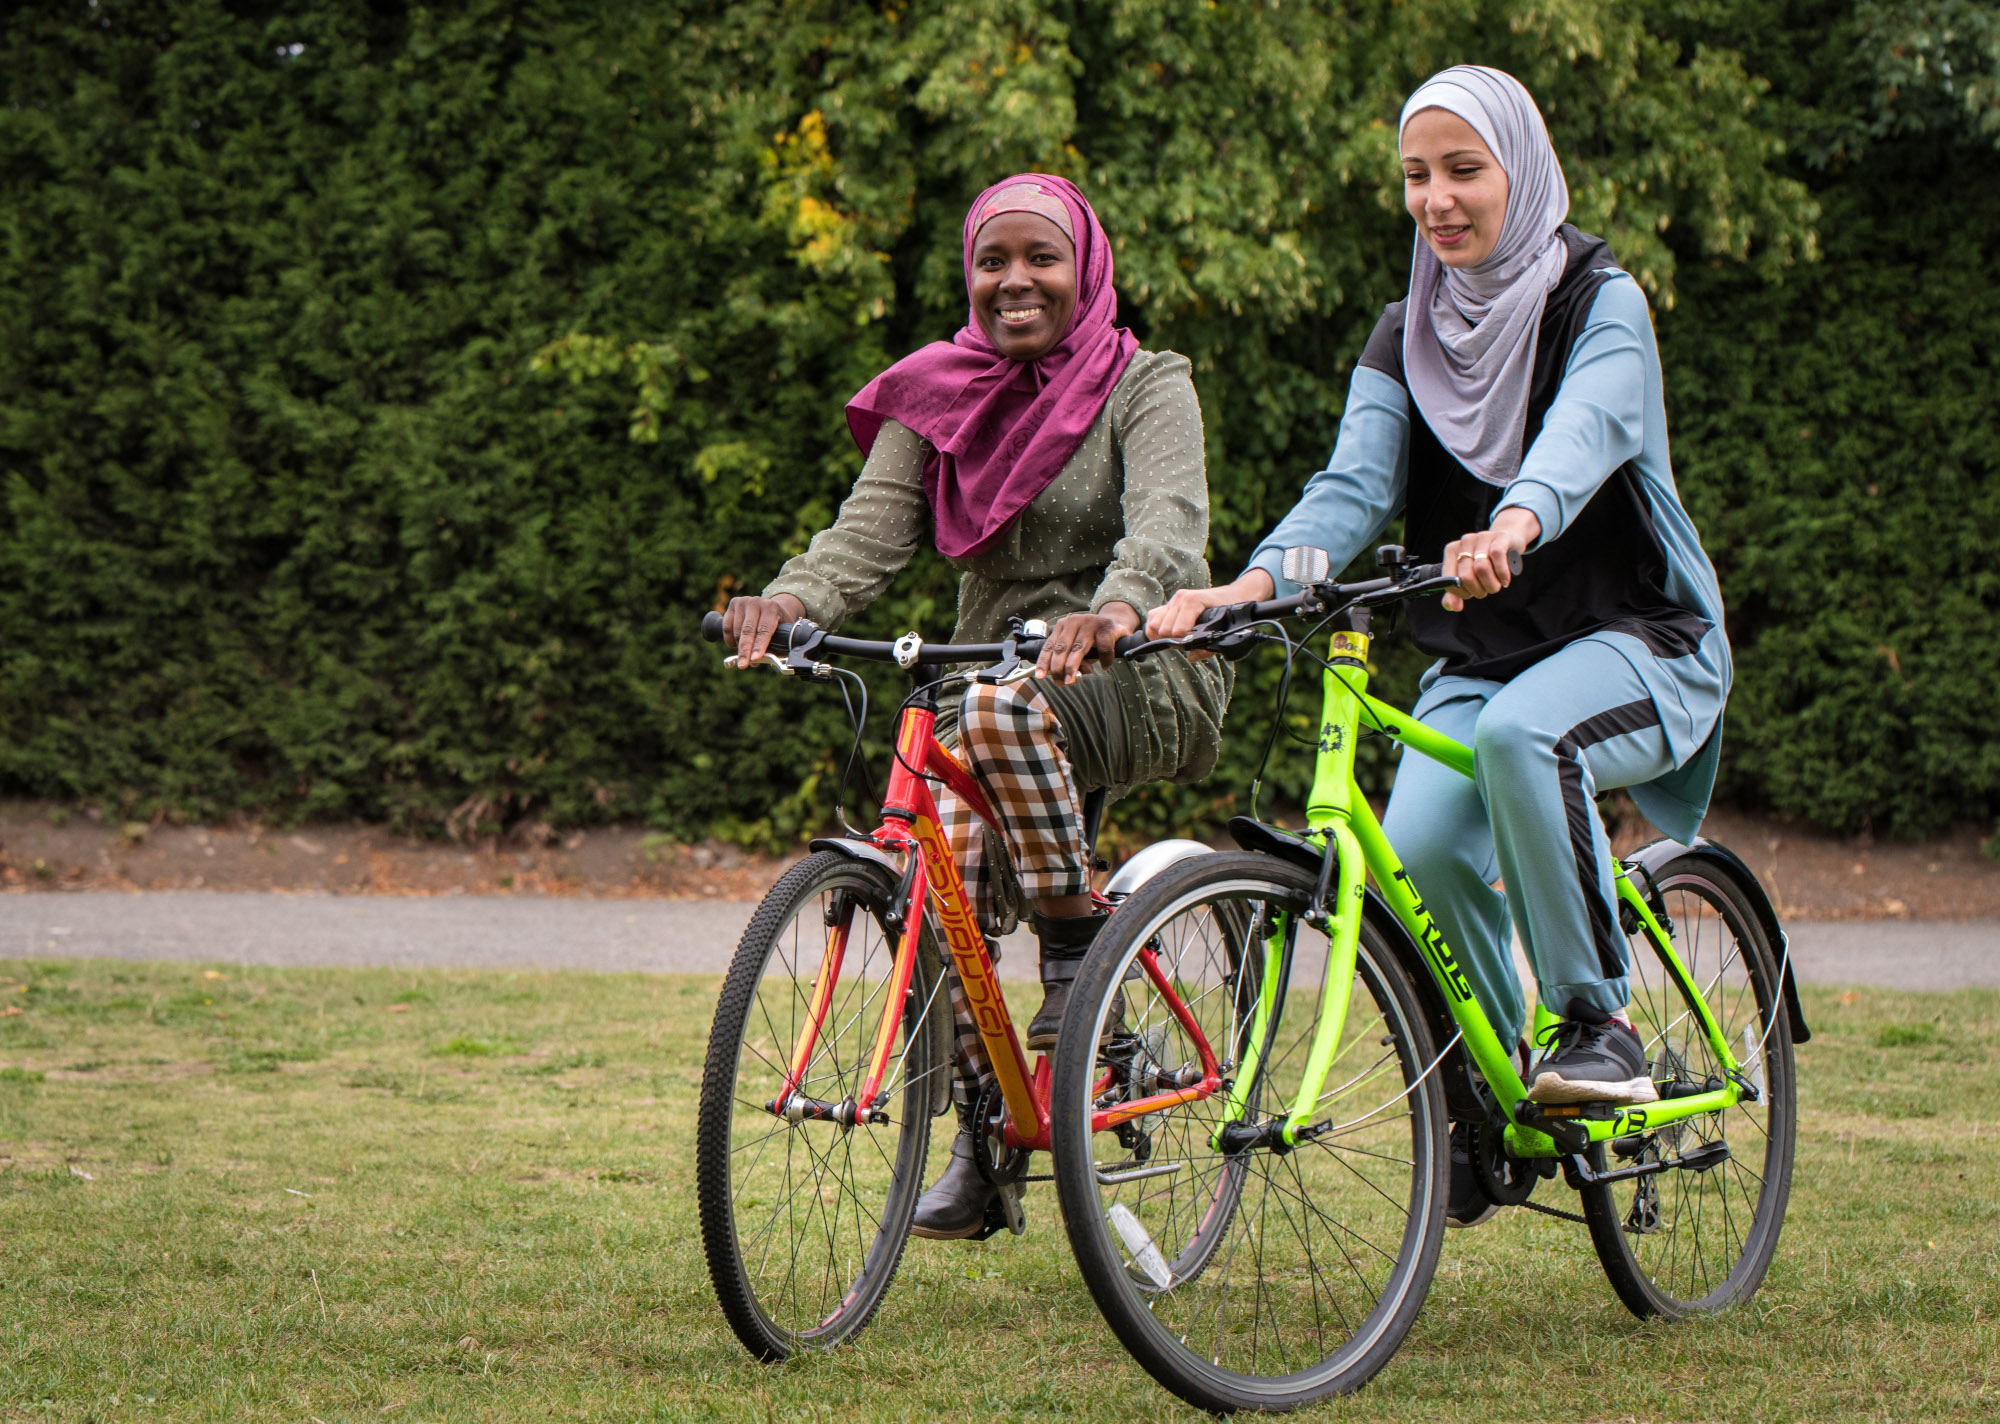 Two ladies cycling on grass